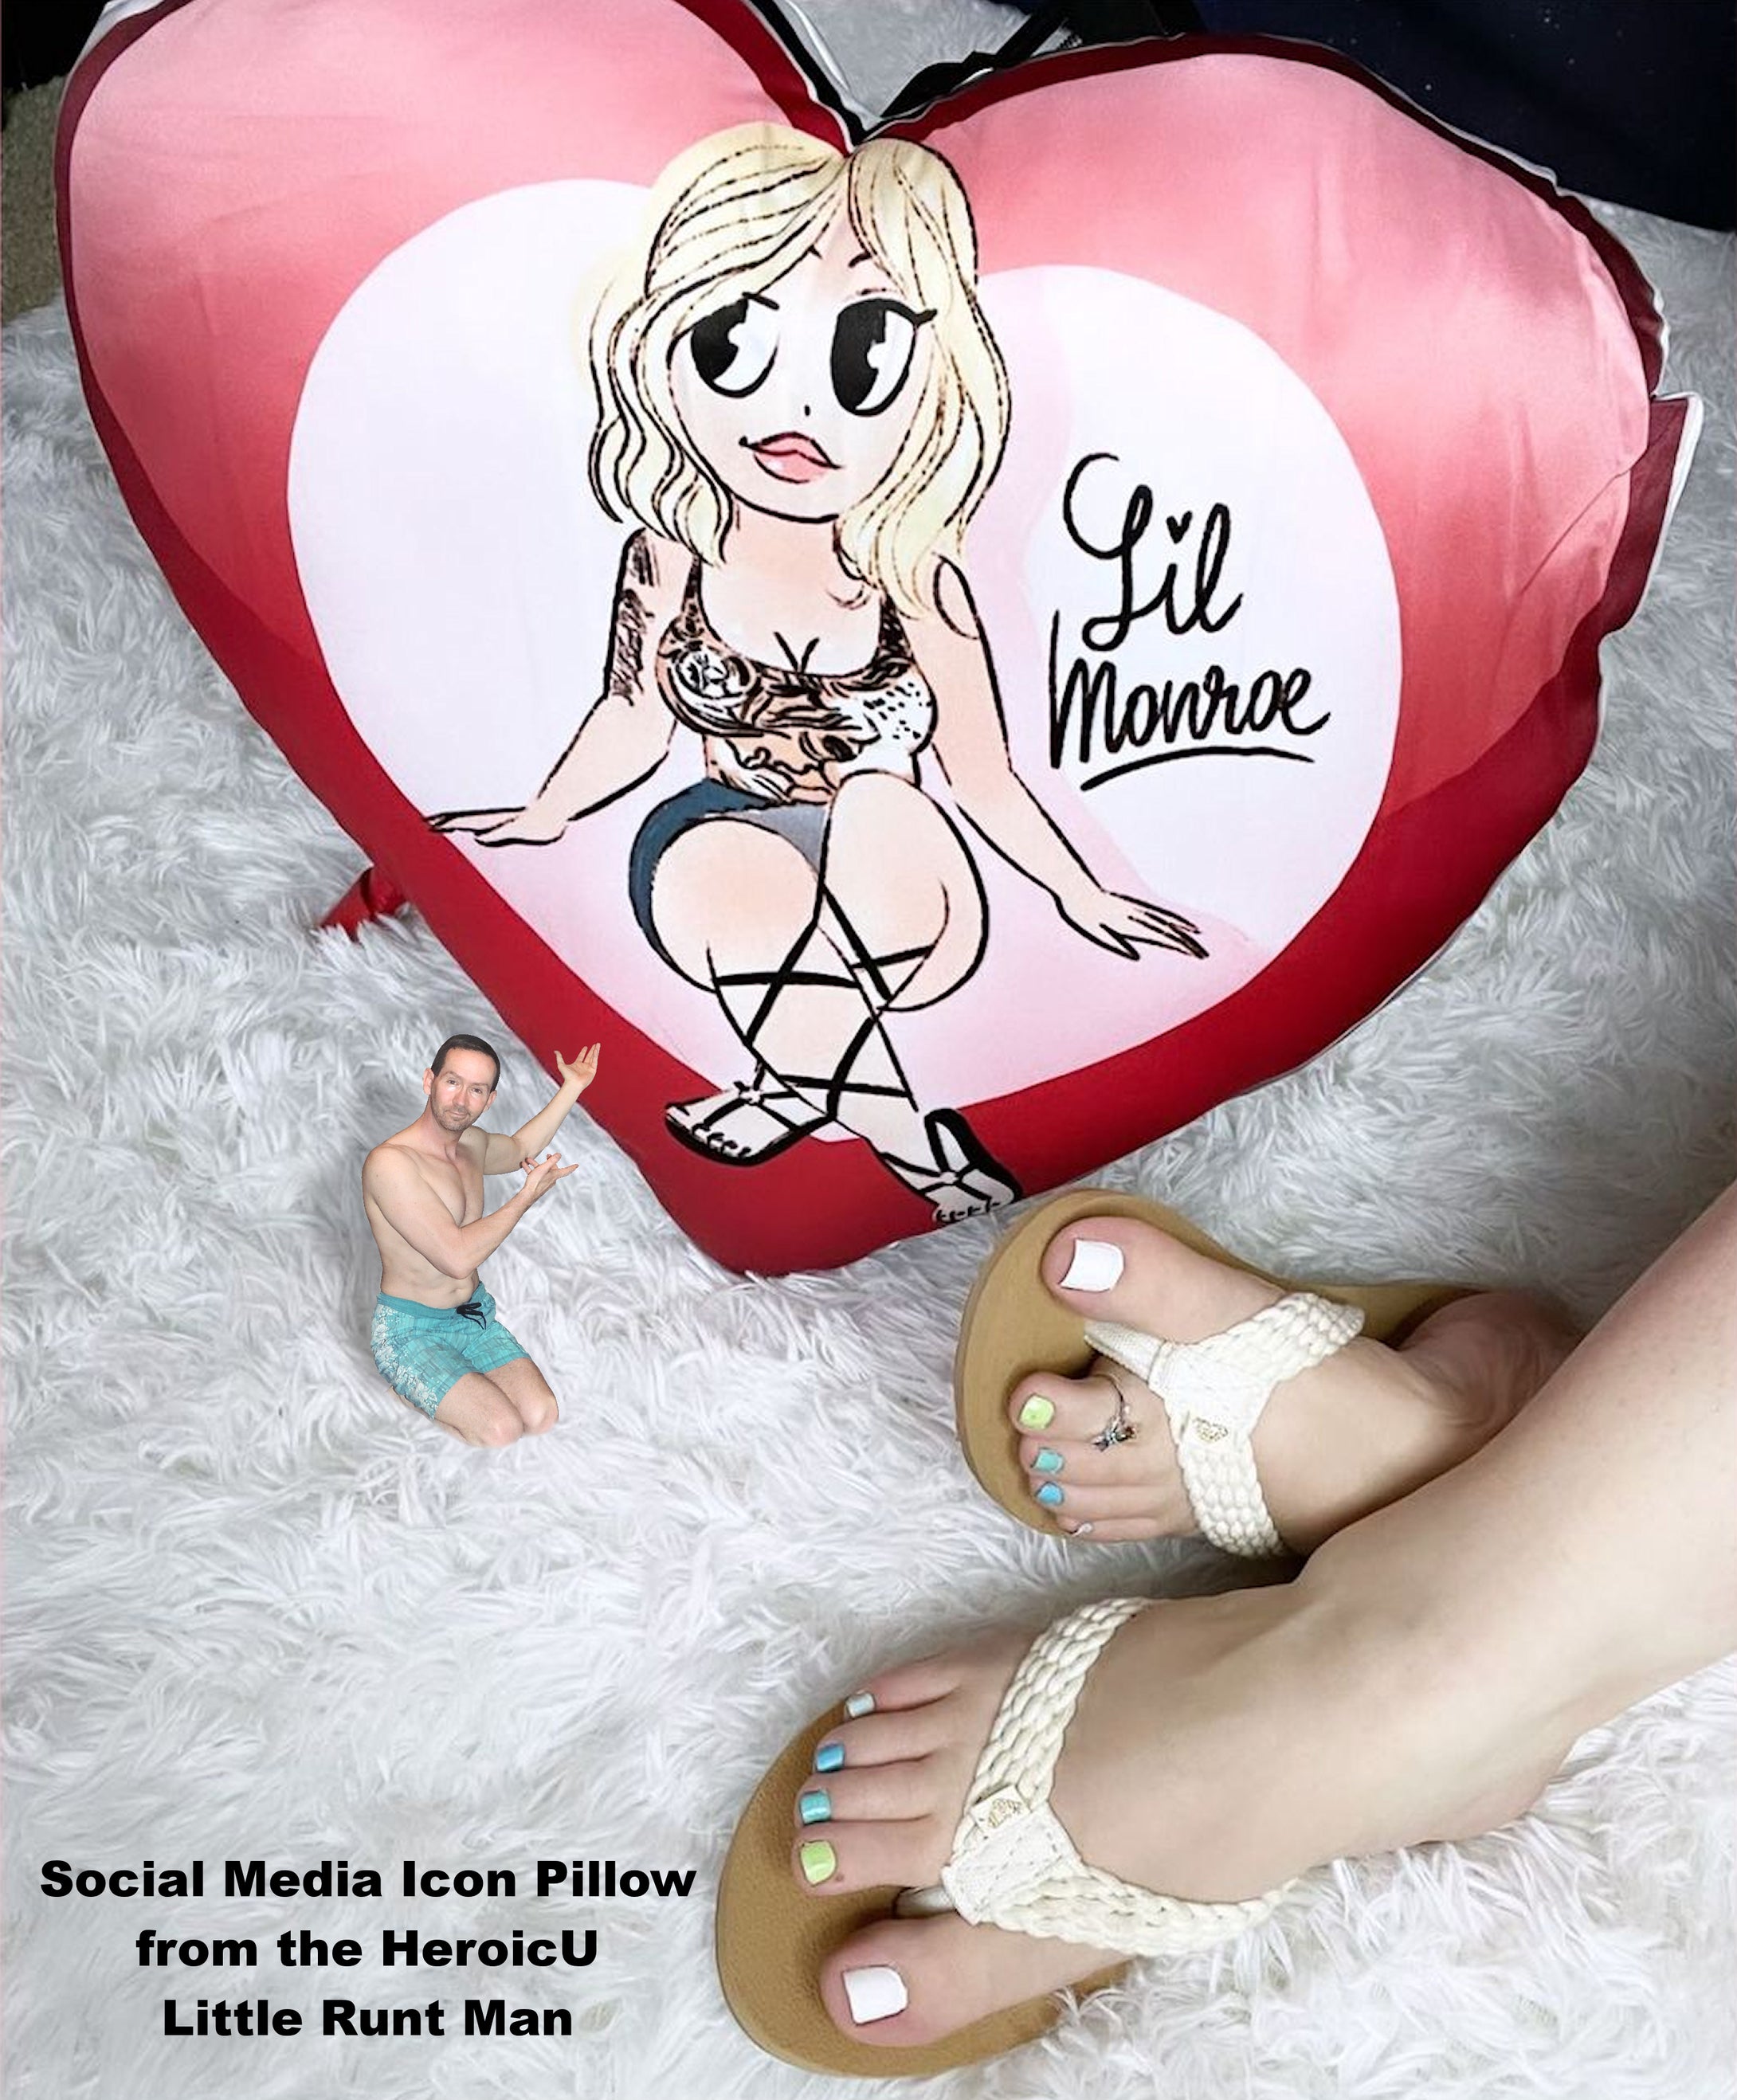 Social Media Icon Pillow Cut to Heart Shape LiL Monroe Toes